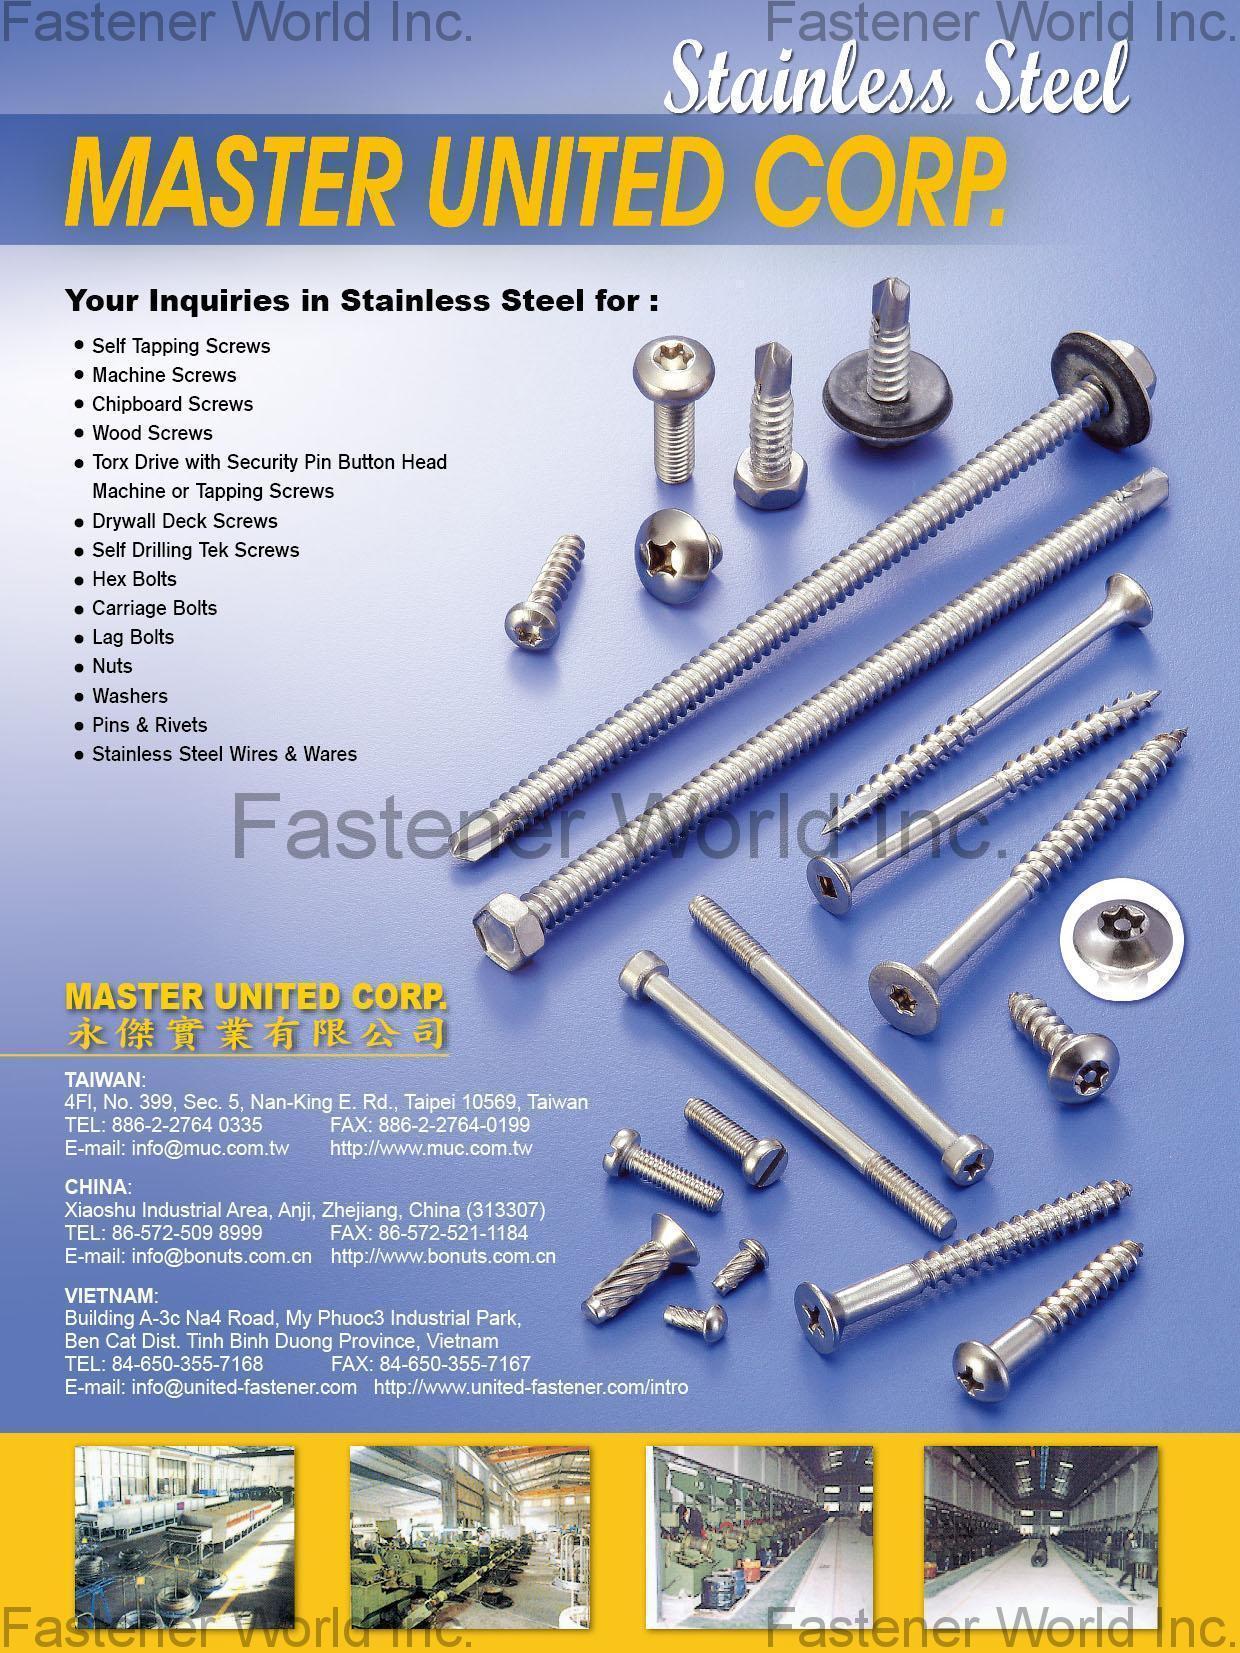 MASTER UNITED CORP.  , Self Tapping Screws,Machine Screws,Chipboard Screws,Wood Screws,Torx Drive with Security Pin Button Head Machine or Tapping Screws,Drywall Screws,Self Drilling Tek Screws,Hex Bolts,Carriage Bolts,Lag Bolts,Nuts,Washers,Pins & Rivets,Stainless Steel Wires & Wares , Stainless Steel Screws